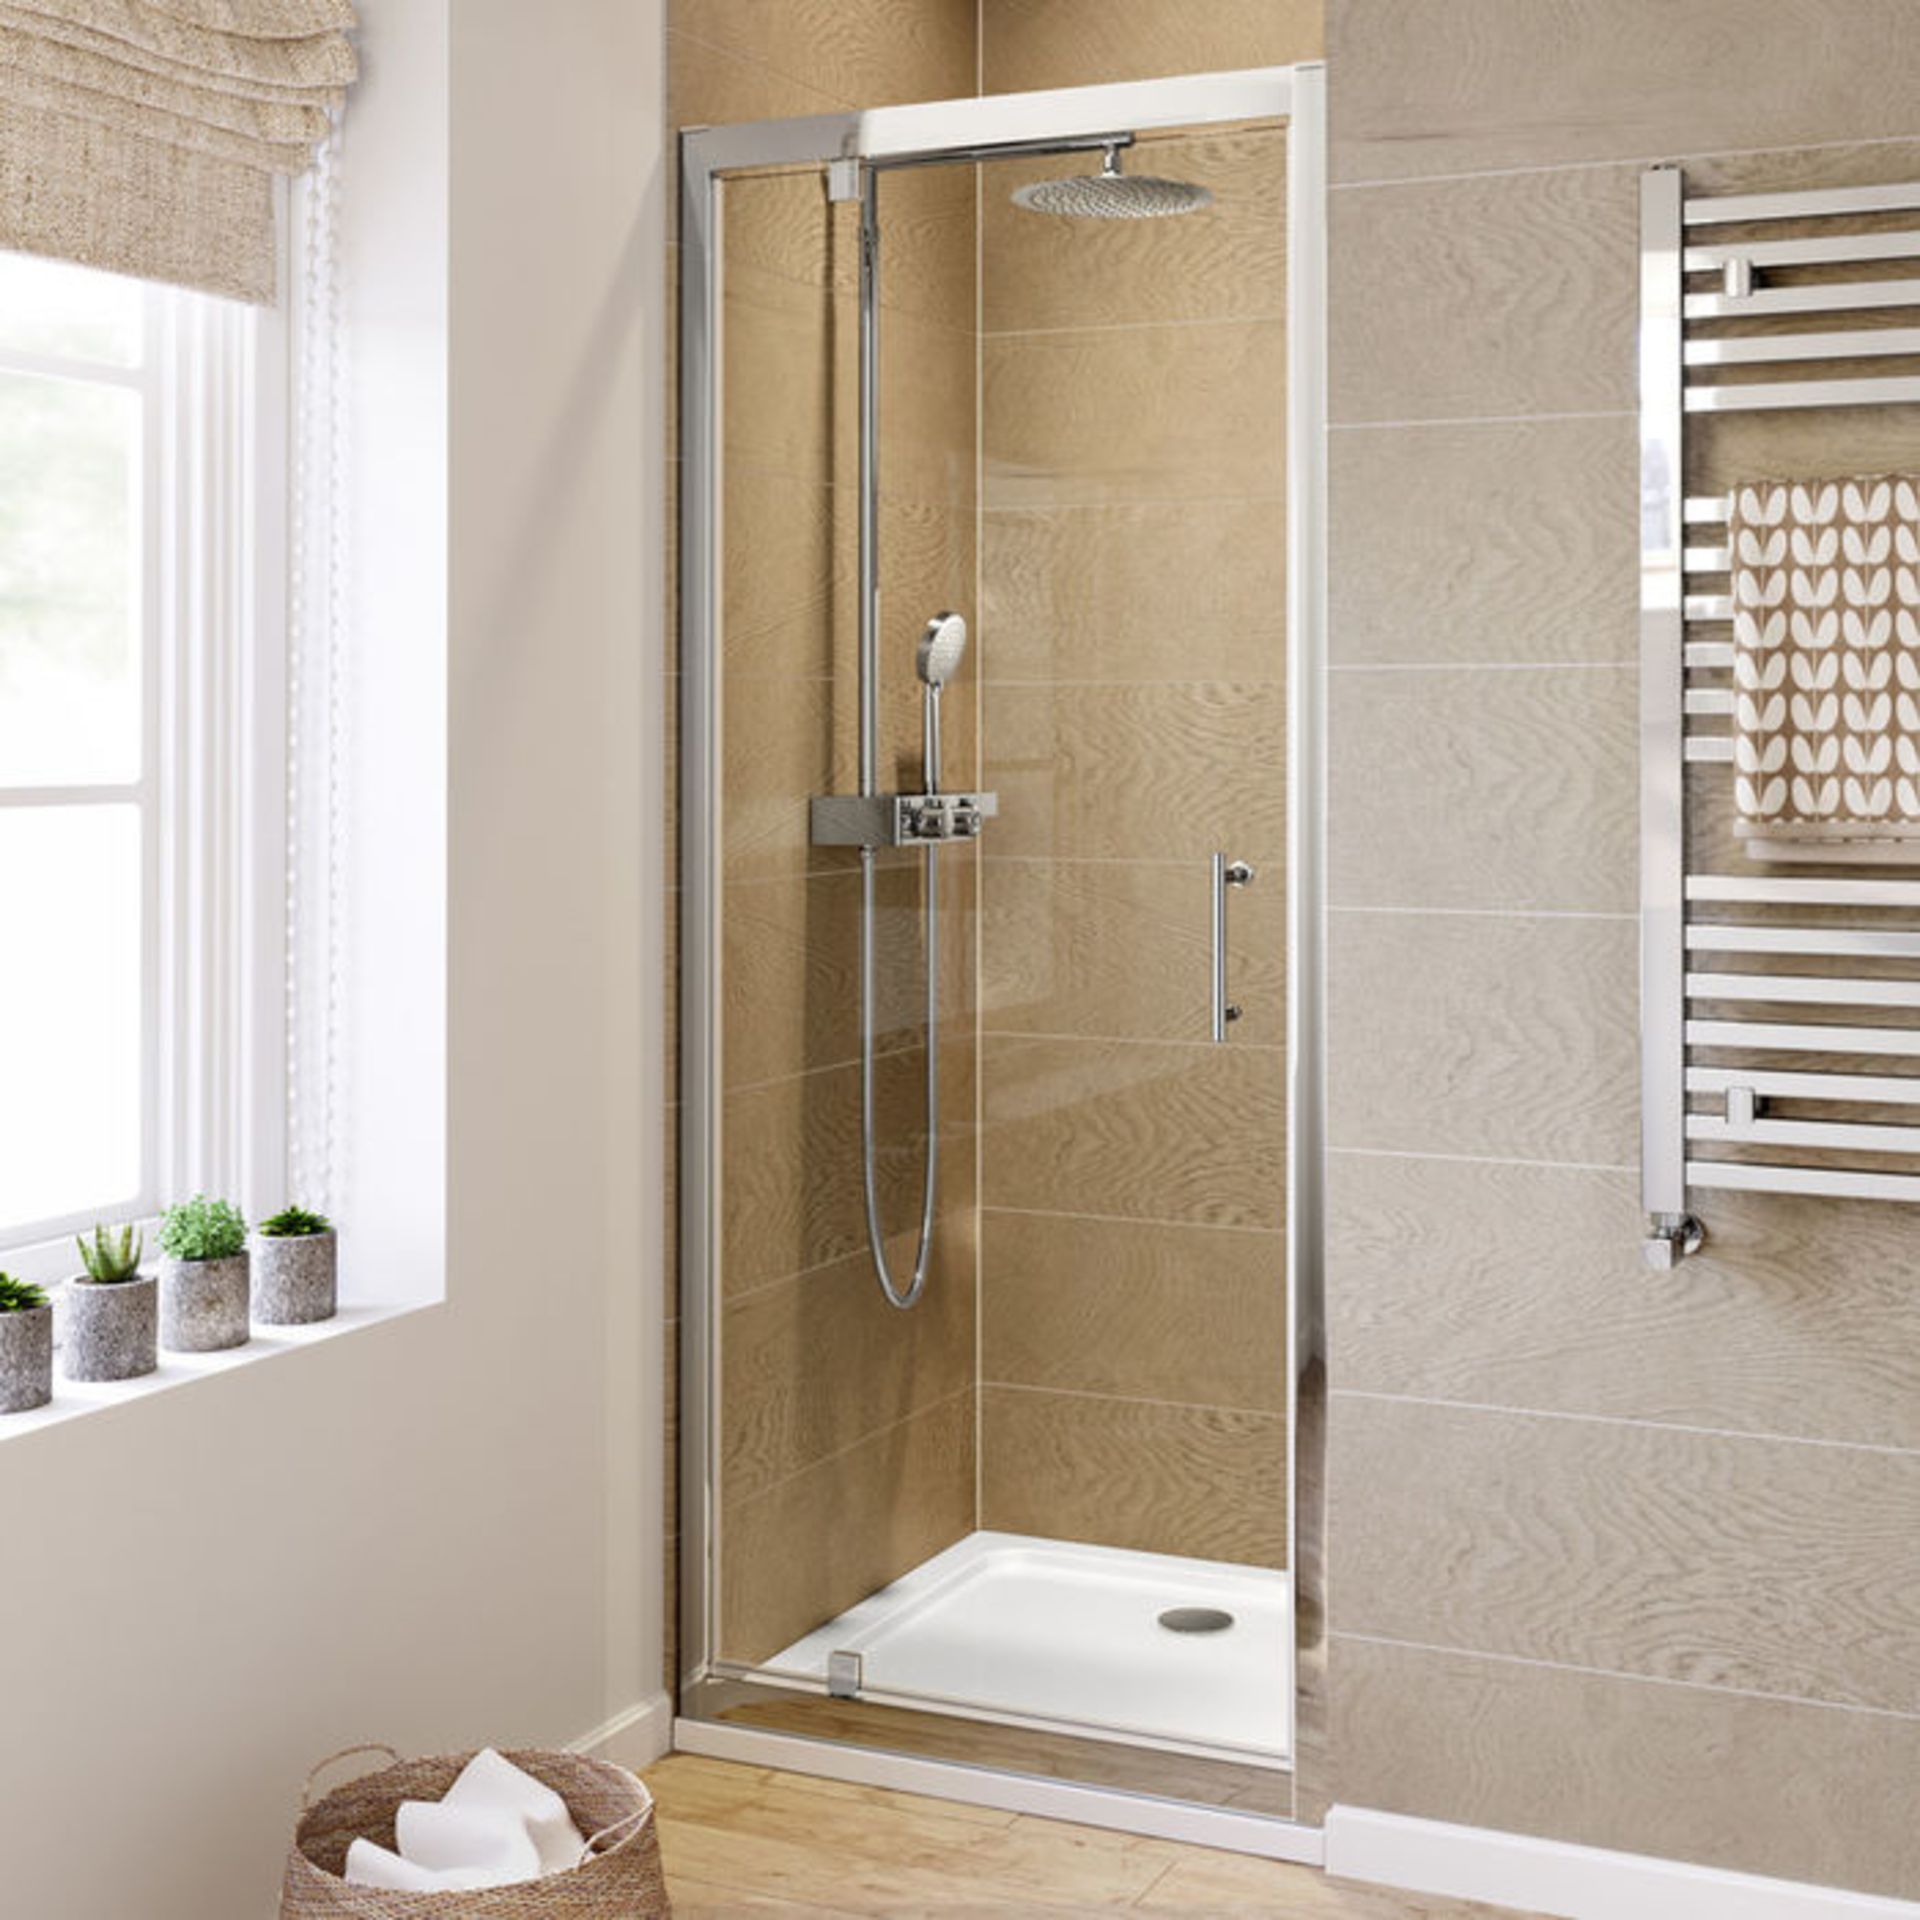 New 6mm - Elements Pivot 760mm Shower Door 6mm Safety Glass Fully Waterproof Tested Polished - Image 2 of 2